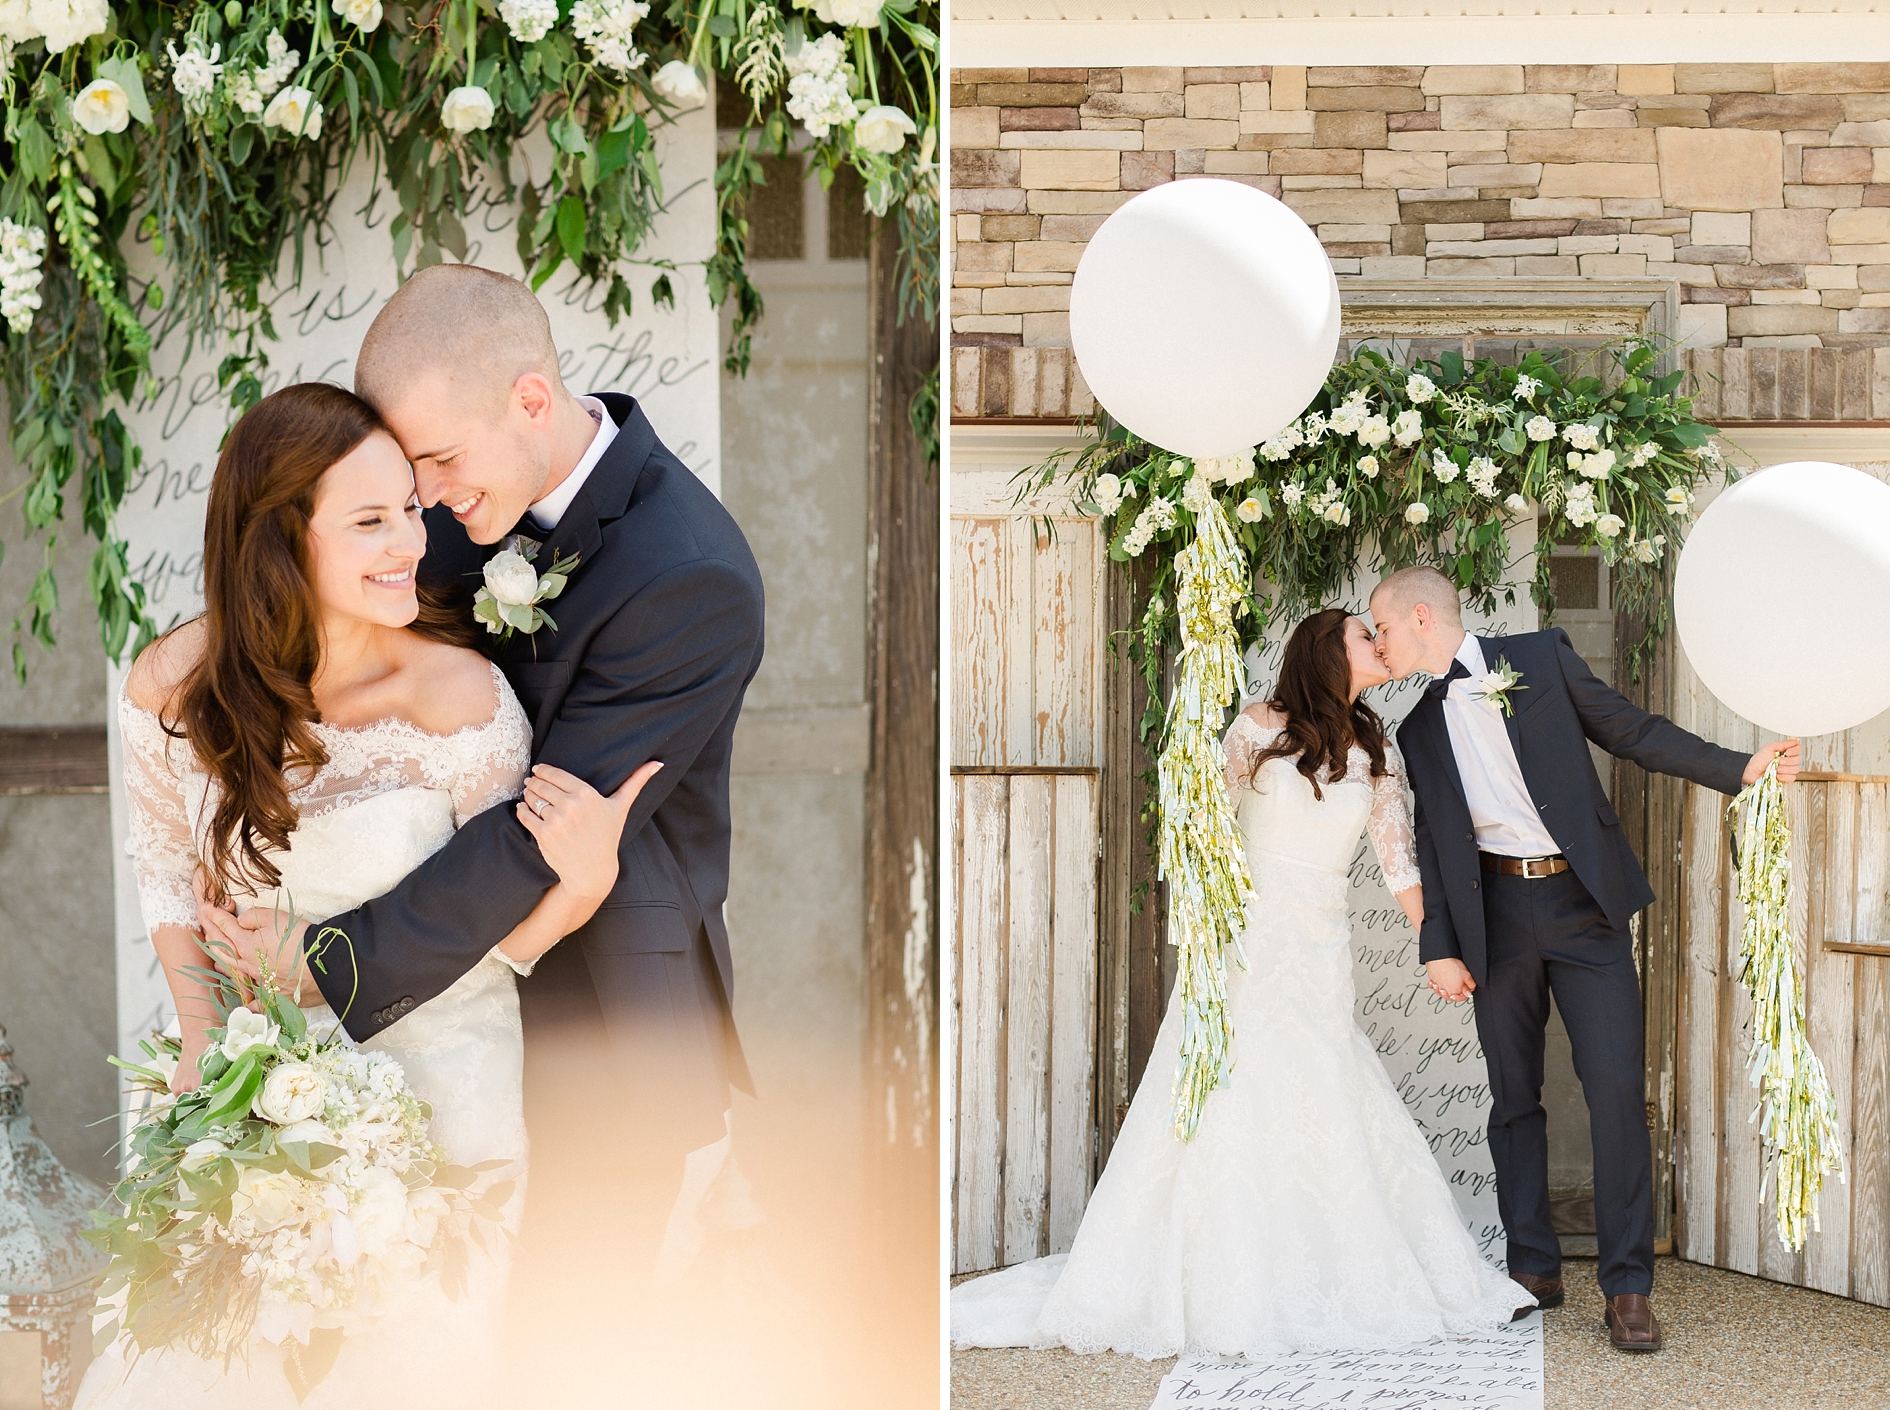 Tampa Wedding Photographer | © Ailyn La Torre Photography 2015